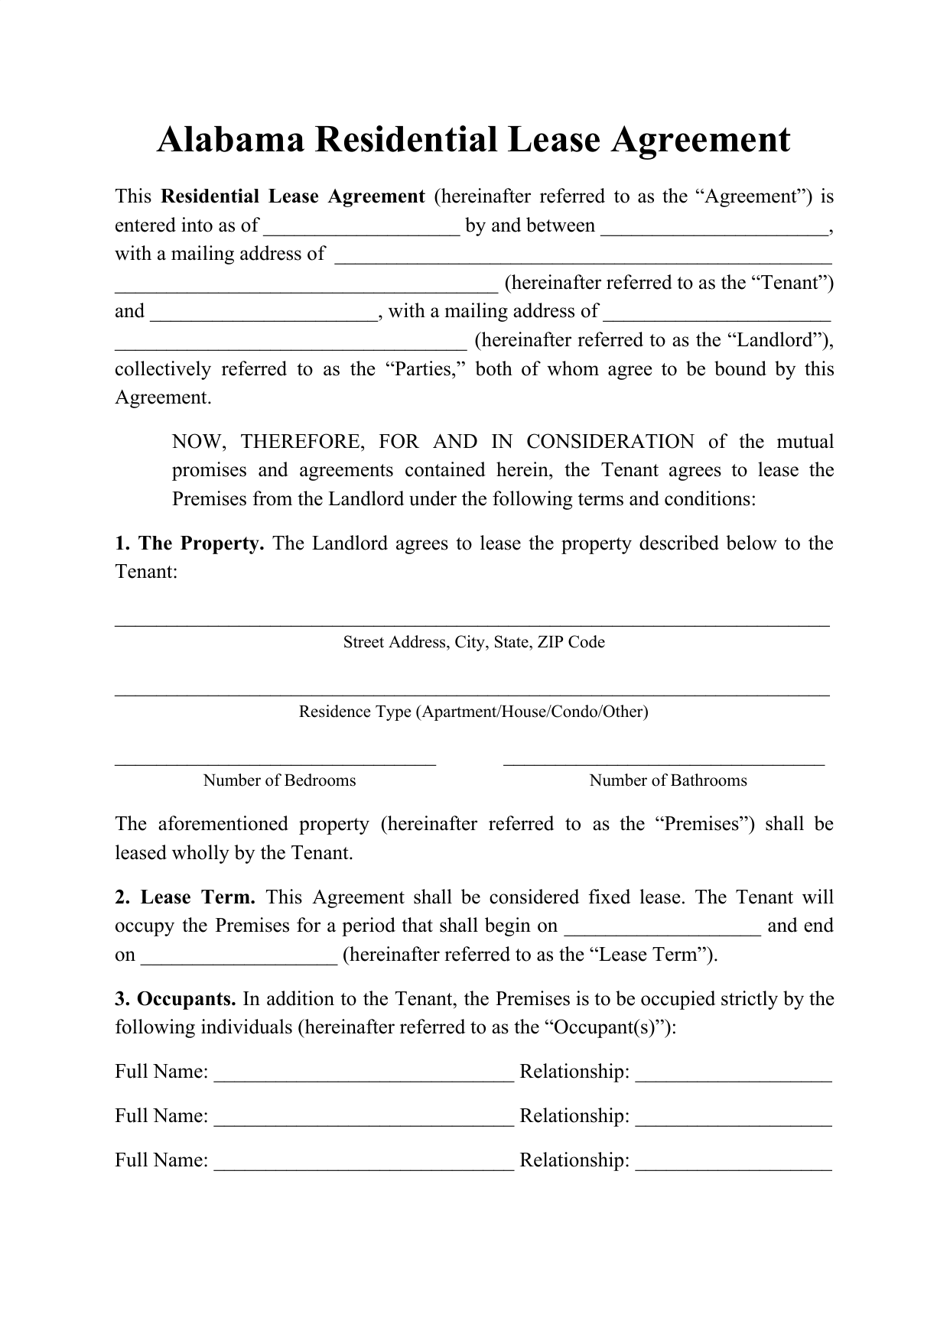 alabama-residential-lease-agreement-template-fill-out-sign-online